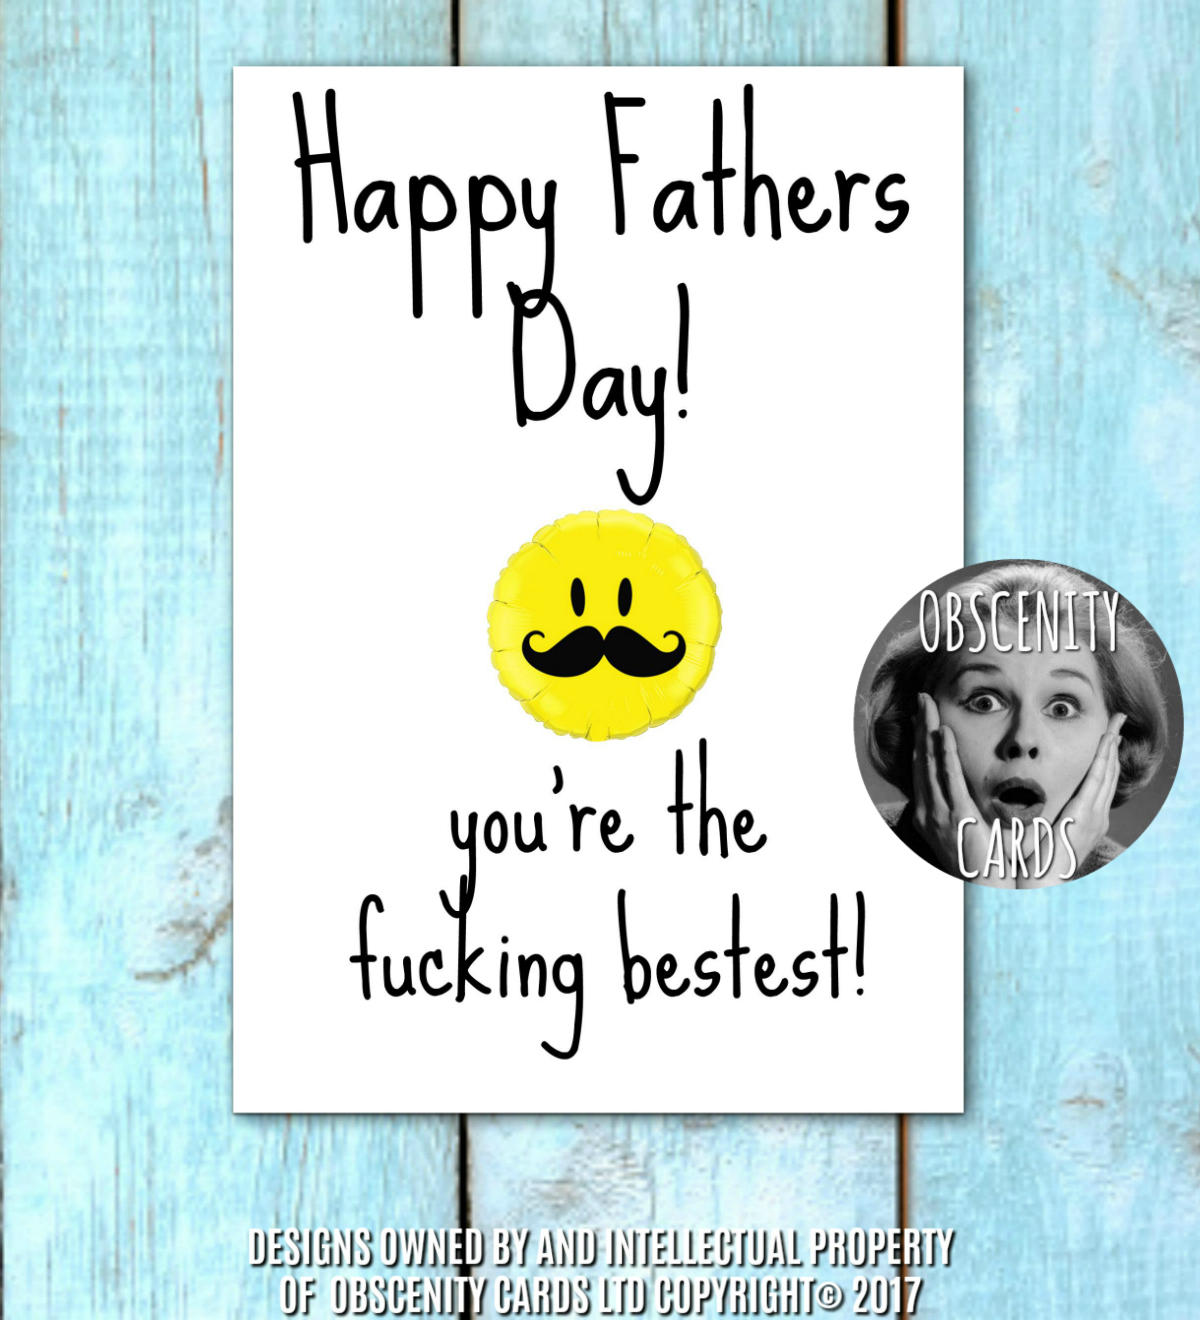 Obscene funny Father's Day cards by Obscenity cards. Obscene Funny Cards, Pens, Party Hats, Key rings, Magnets, Lighters & Loads More!